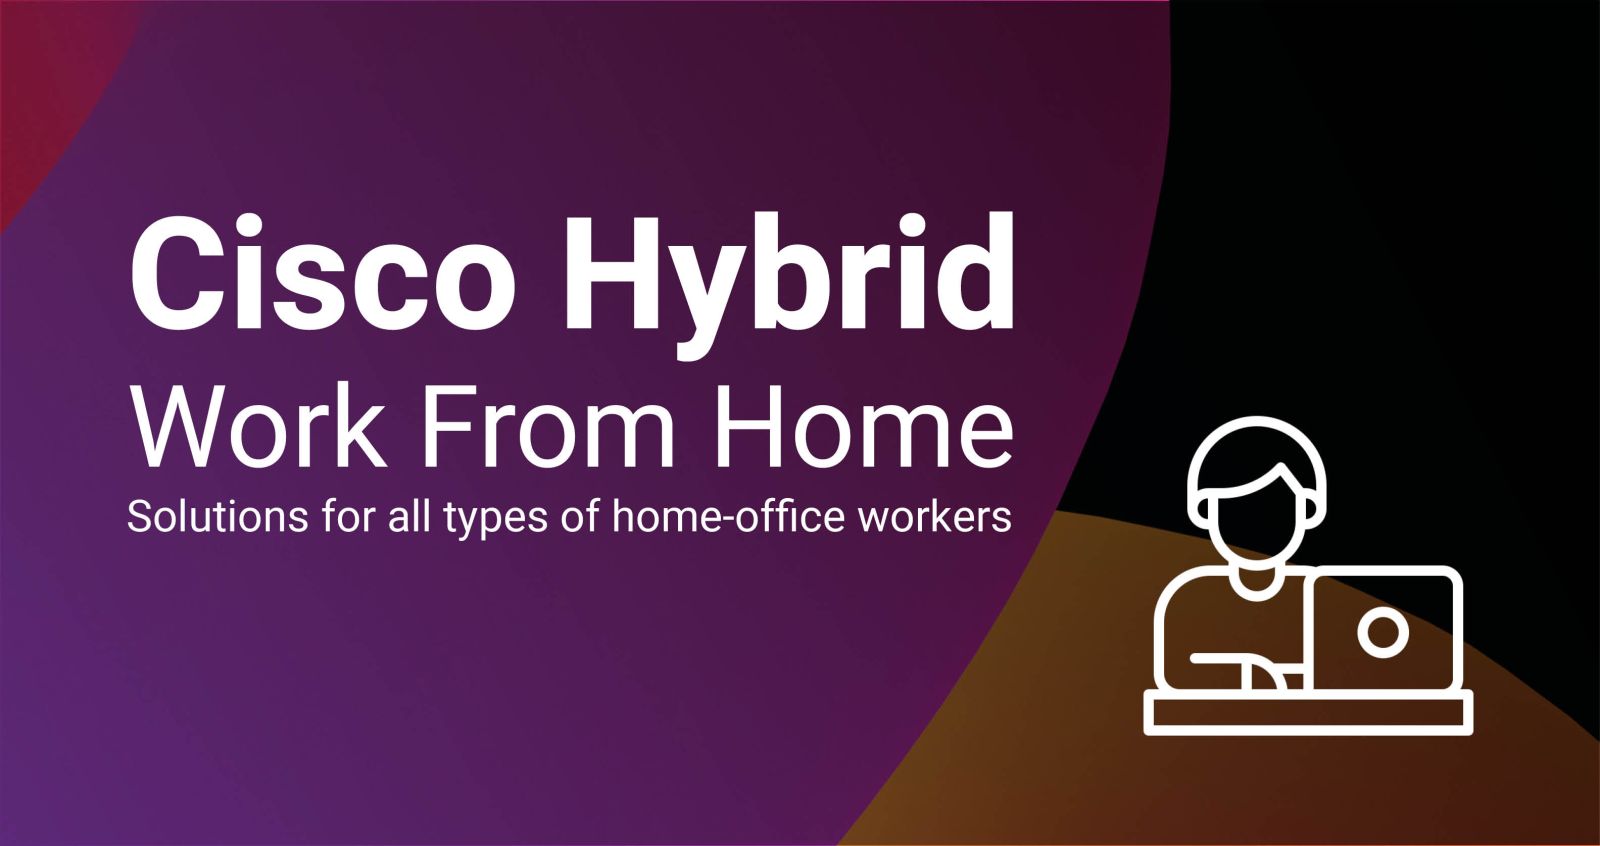 CISCO HYBRID WORK FROM HOME Featured Image